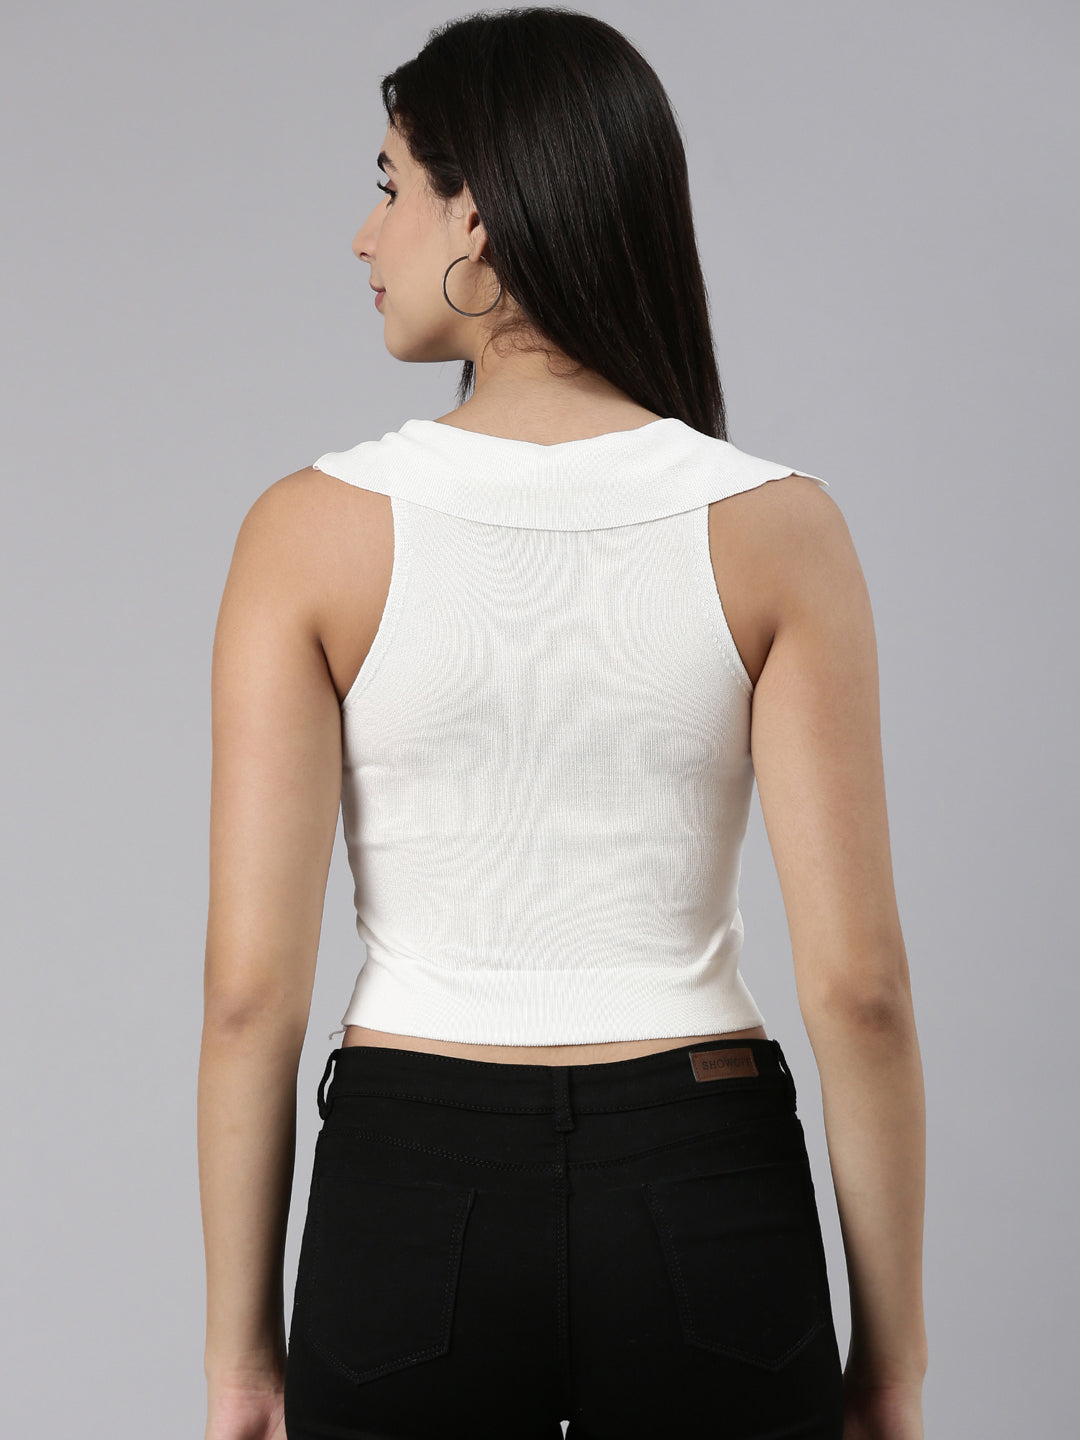 Above the Keyboard Collar Solid White Fitted Crop Top